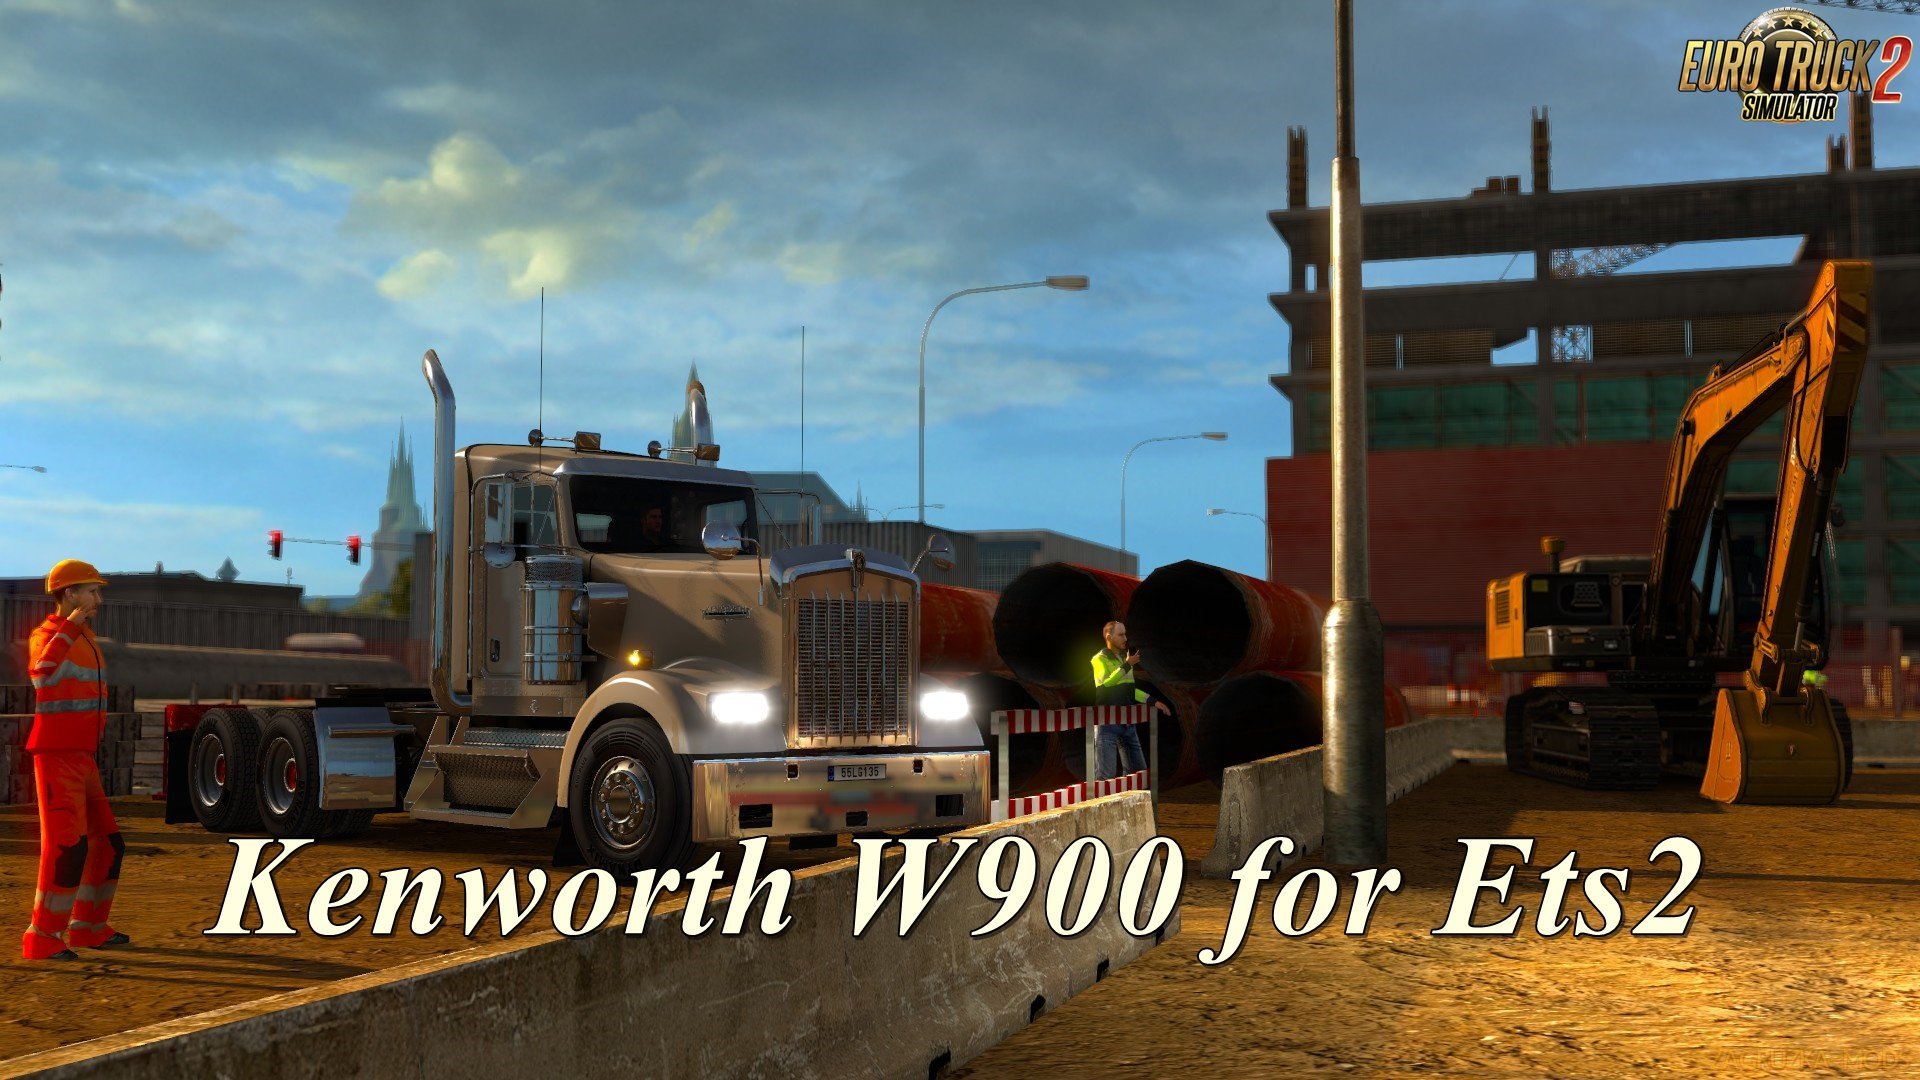 Kenworth W900 Truck for Ets2